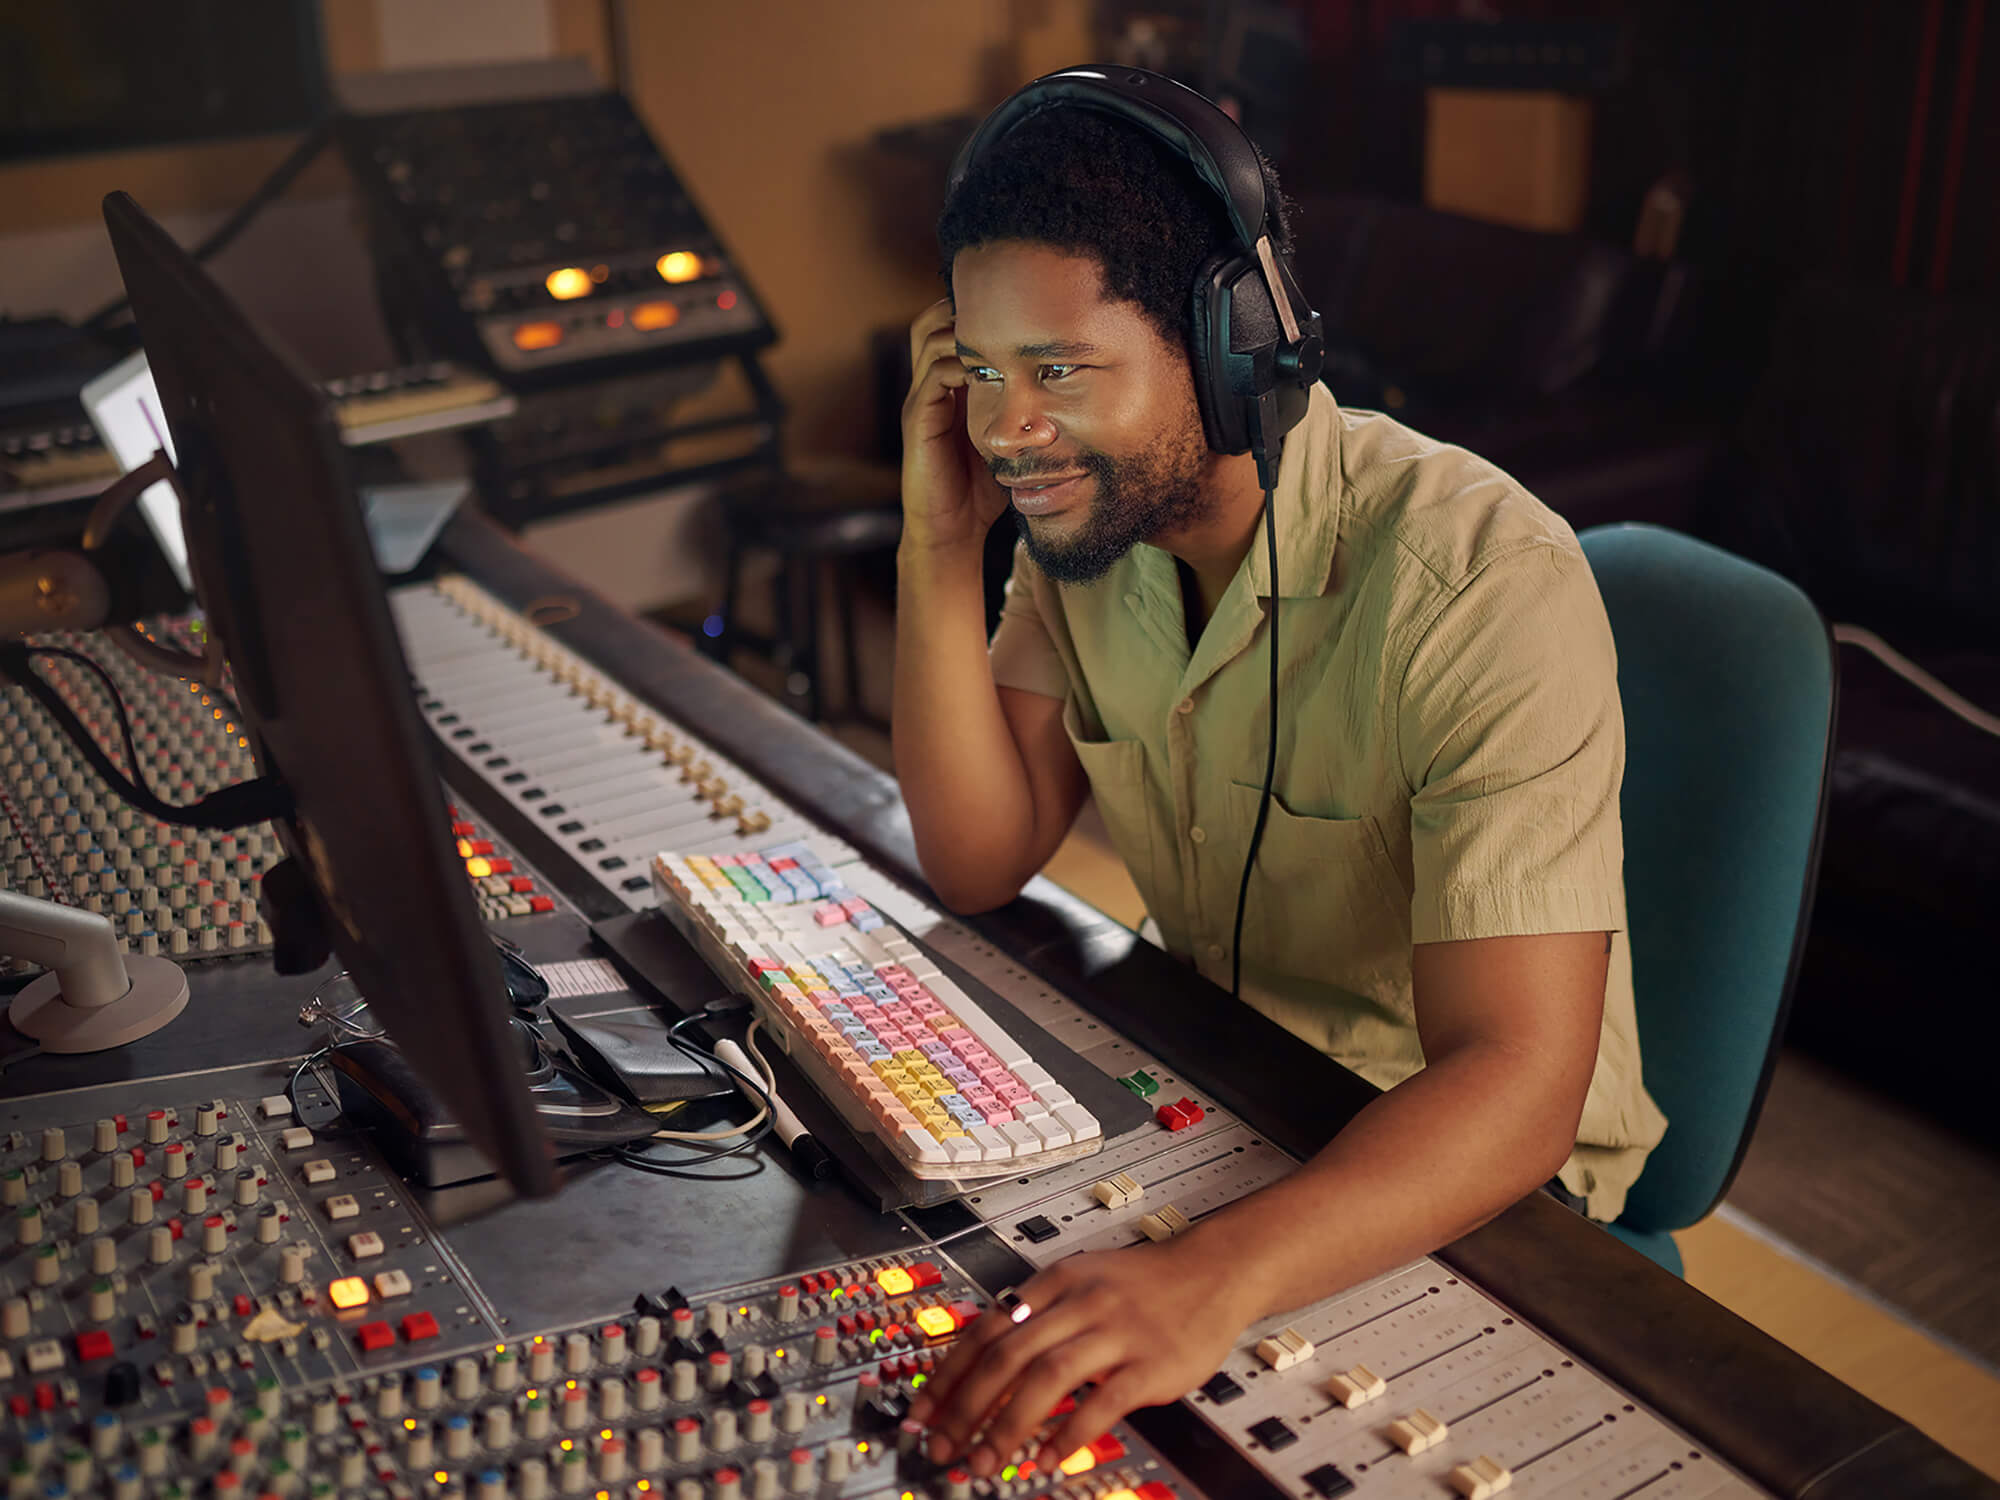 Music producer at a work desk in a studio, photo by PeopleImages via Getty Images